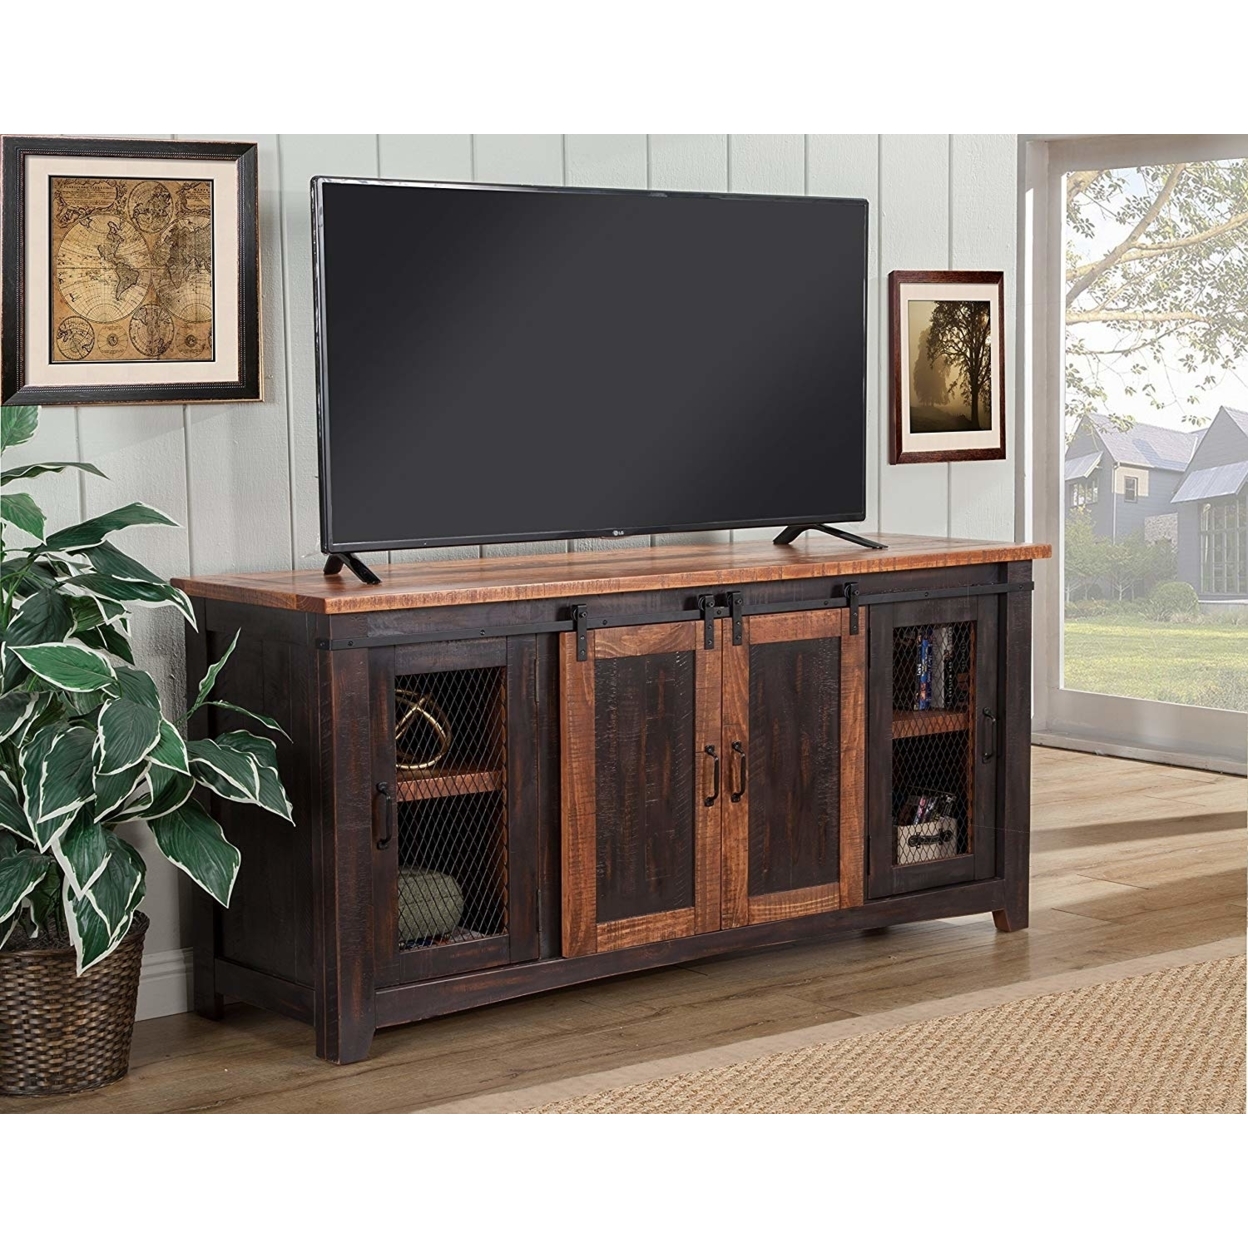 Dual Tone Wood And Metal TV Stand With 2 Mesh Style Doors, Antique Black And Brown- Saltoro Sherpi